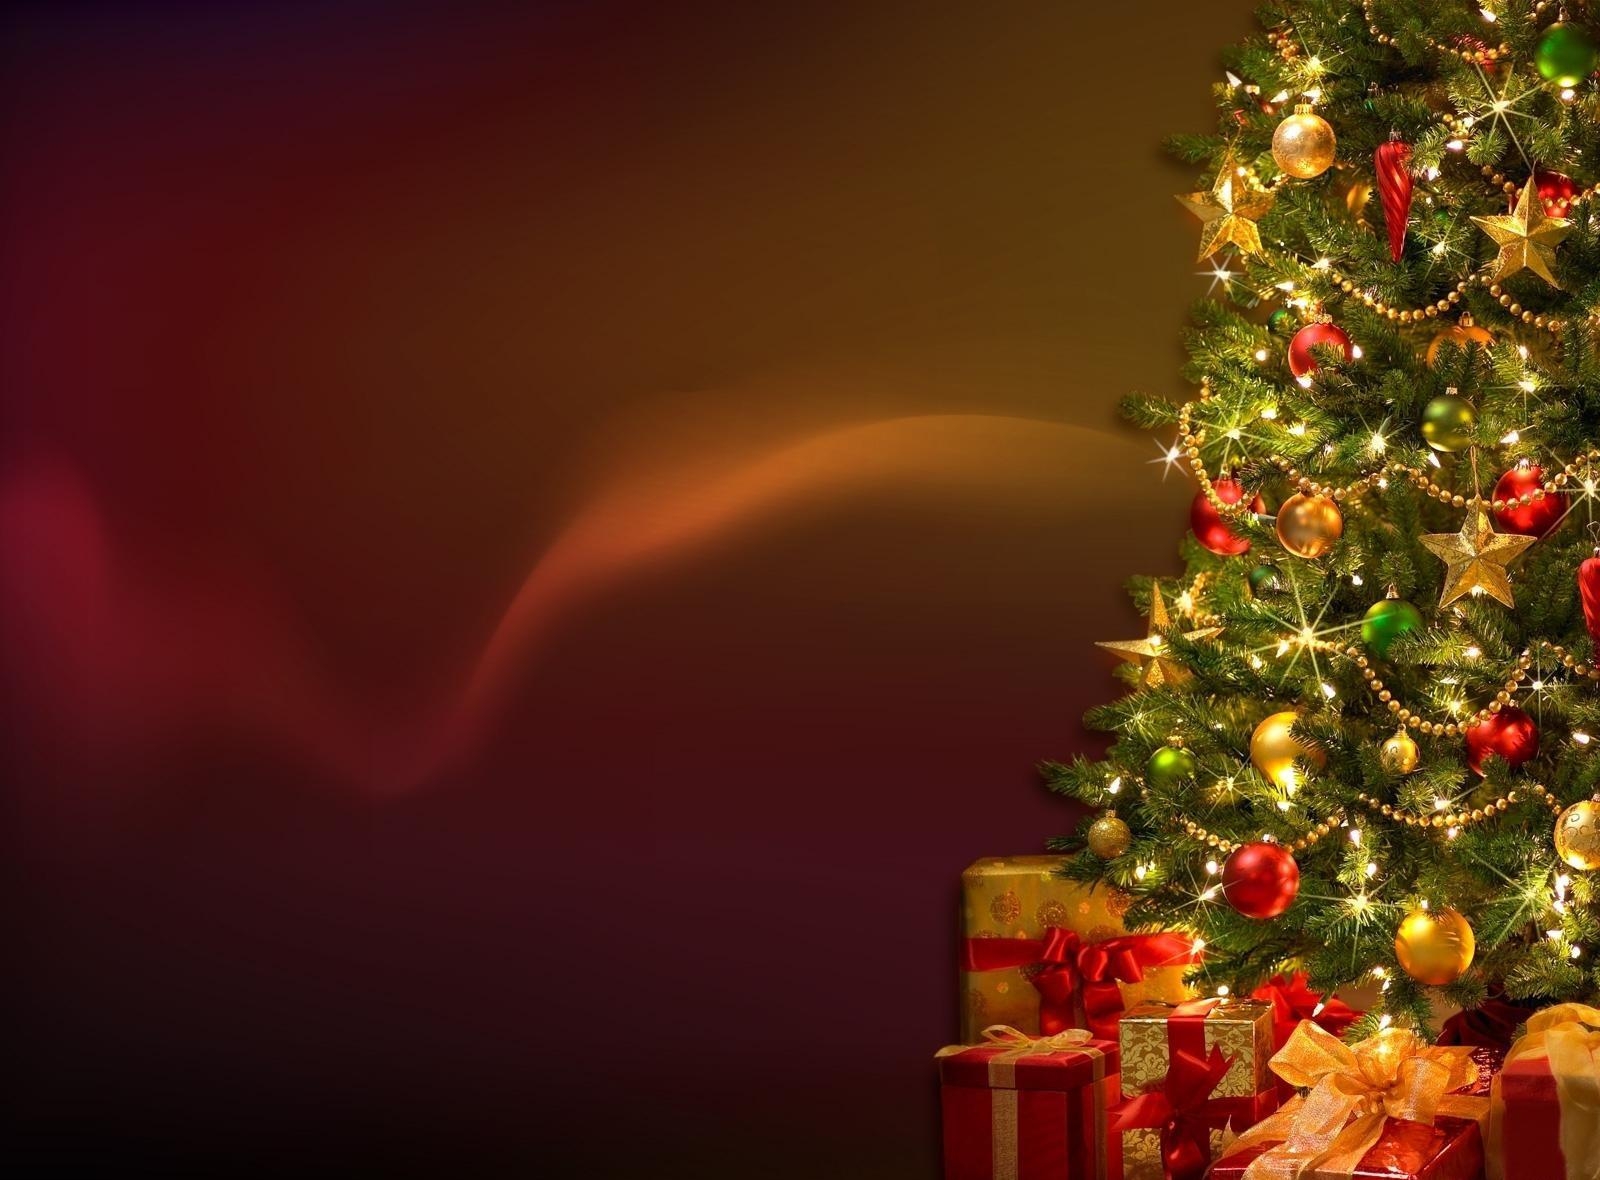 Desktop Backgrounds Gifts presents, christmas tree, holidays, decorations